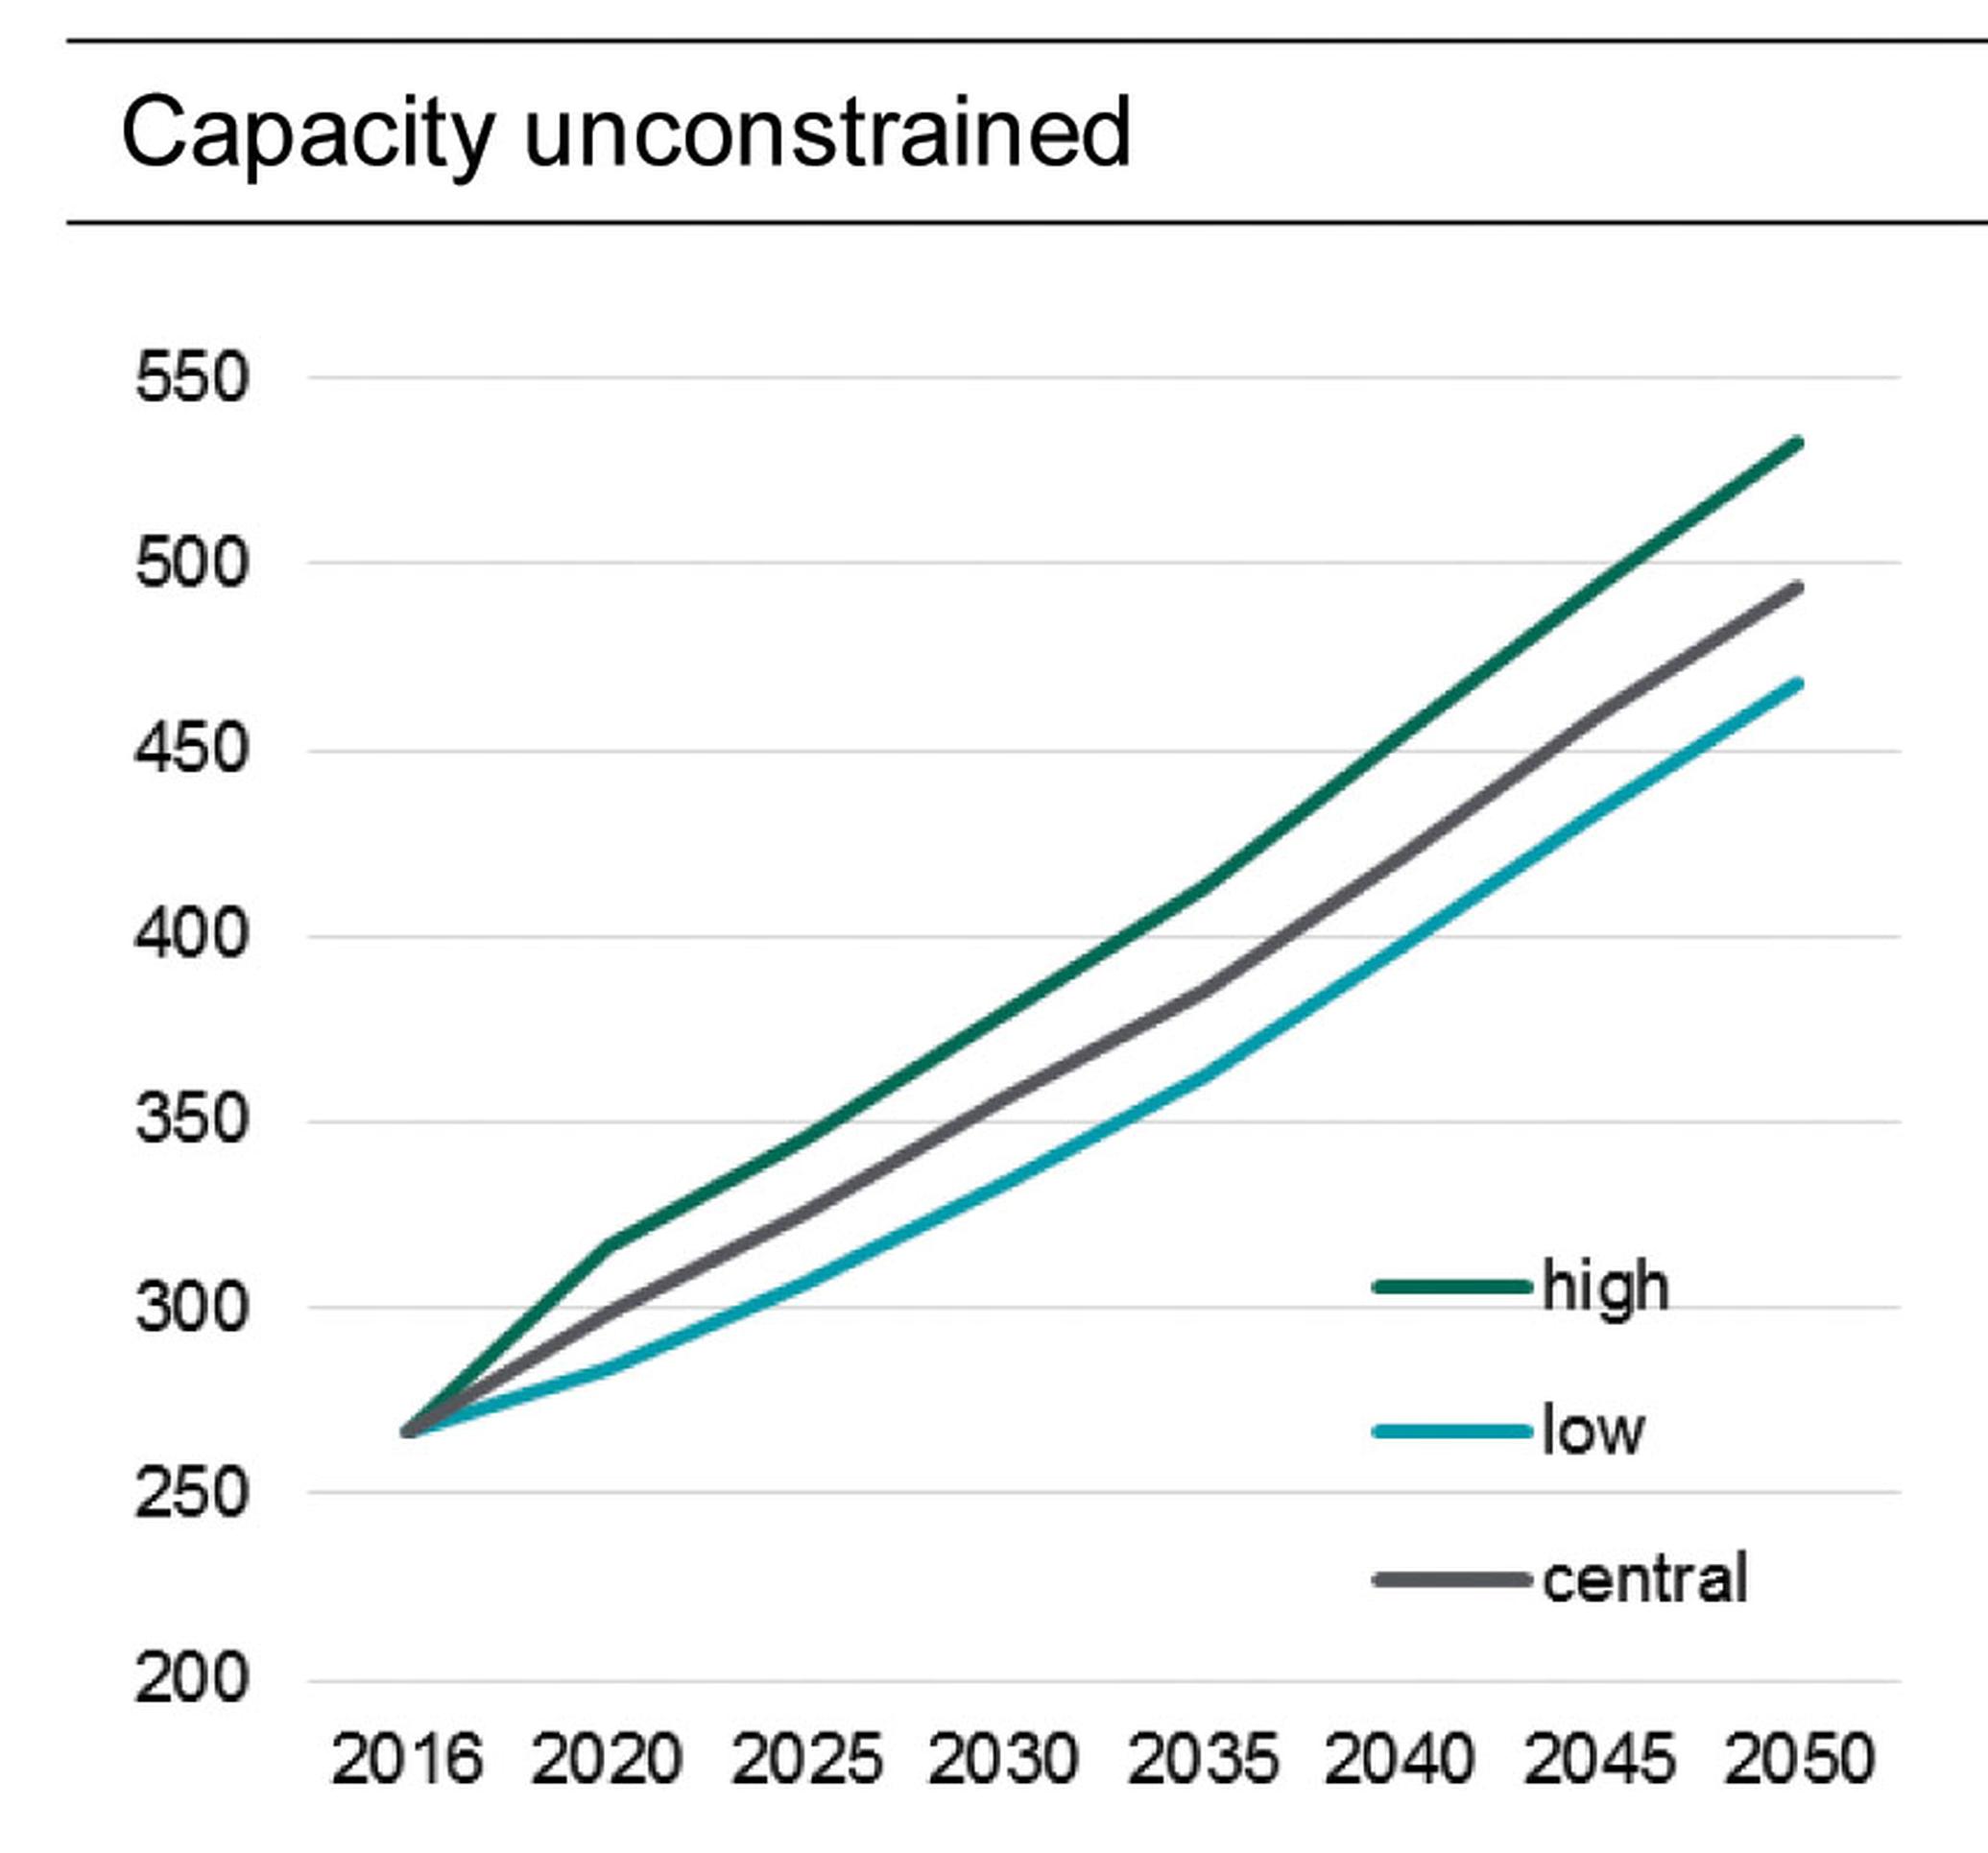 The DfT presents forecasts under two scenarios: unconstrained and capacity constrained baseline, the latter assuming no new runway capacity